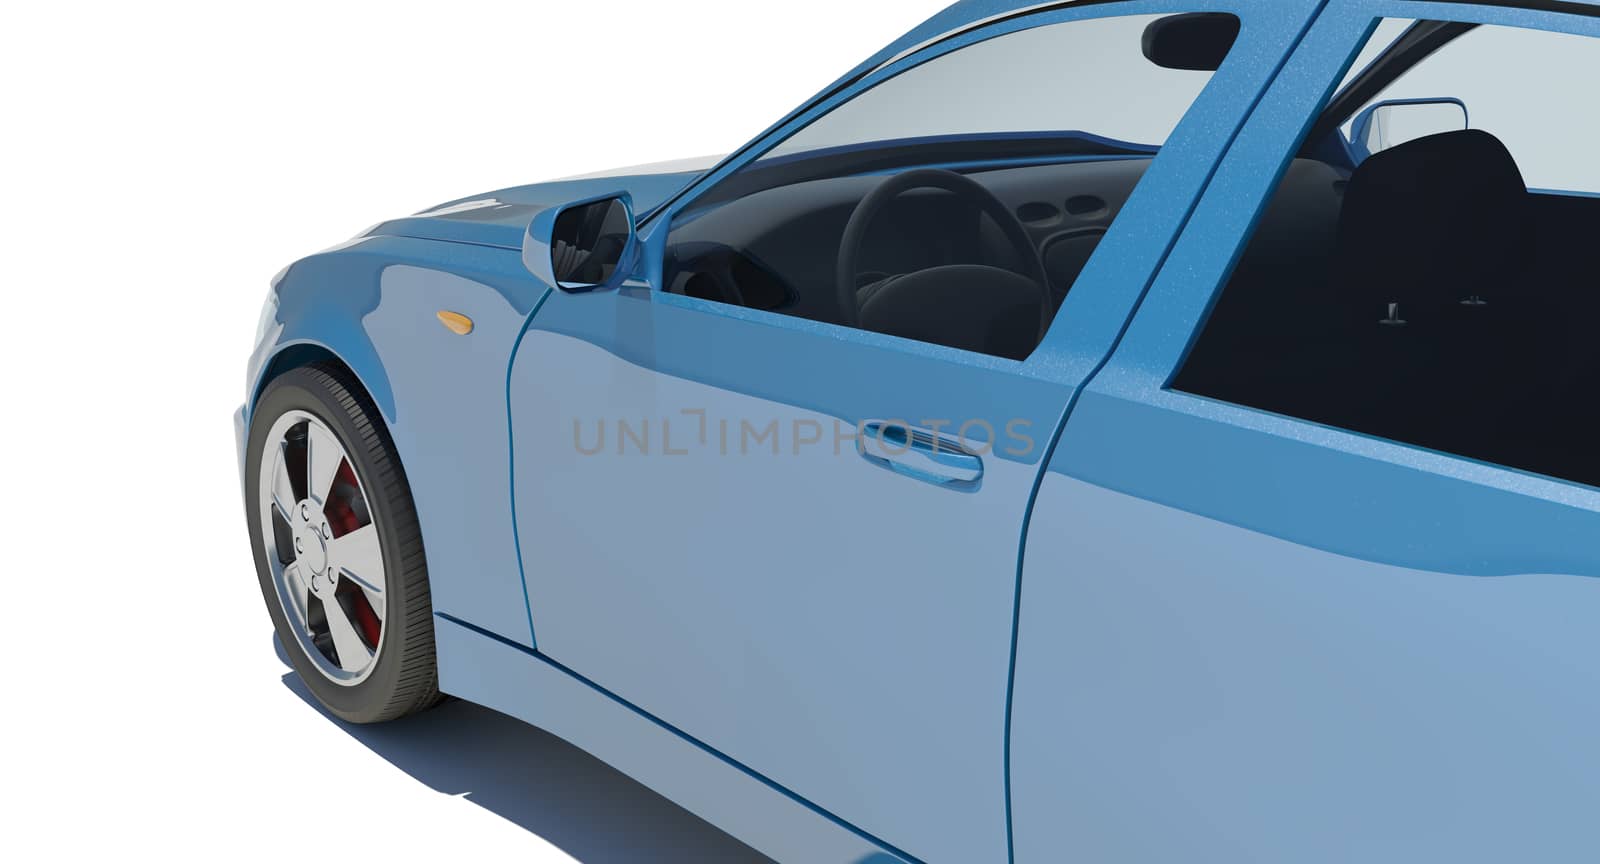 Car on isolated white background, close-up view